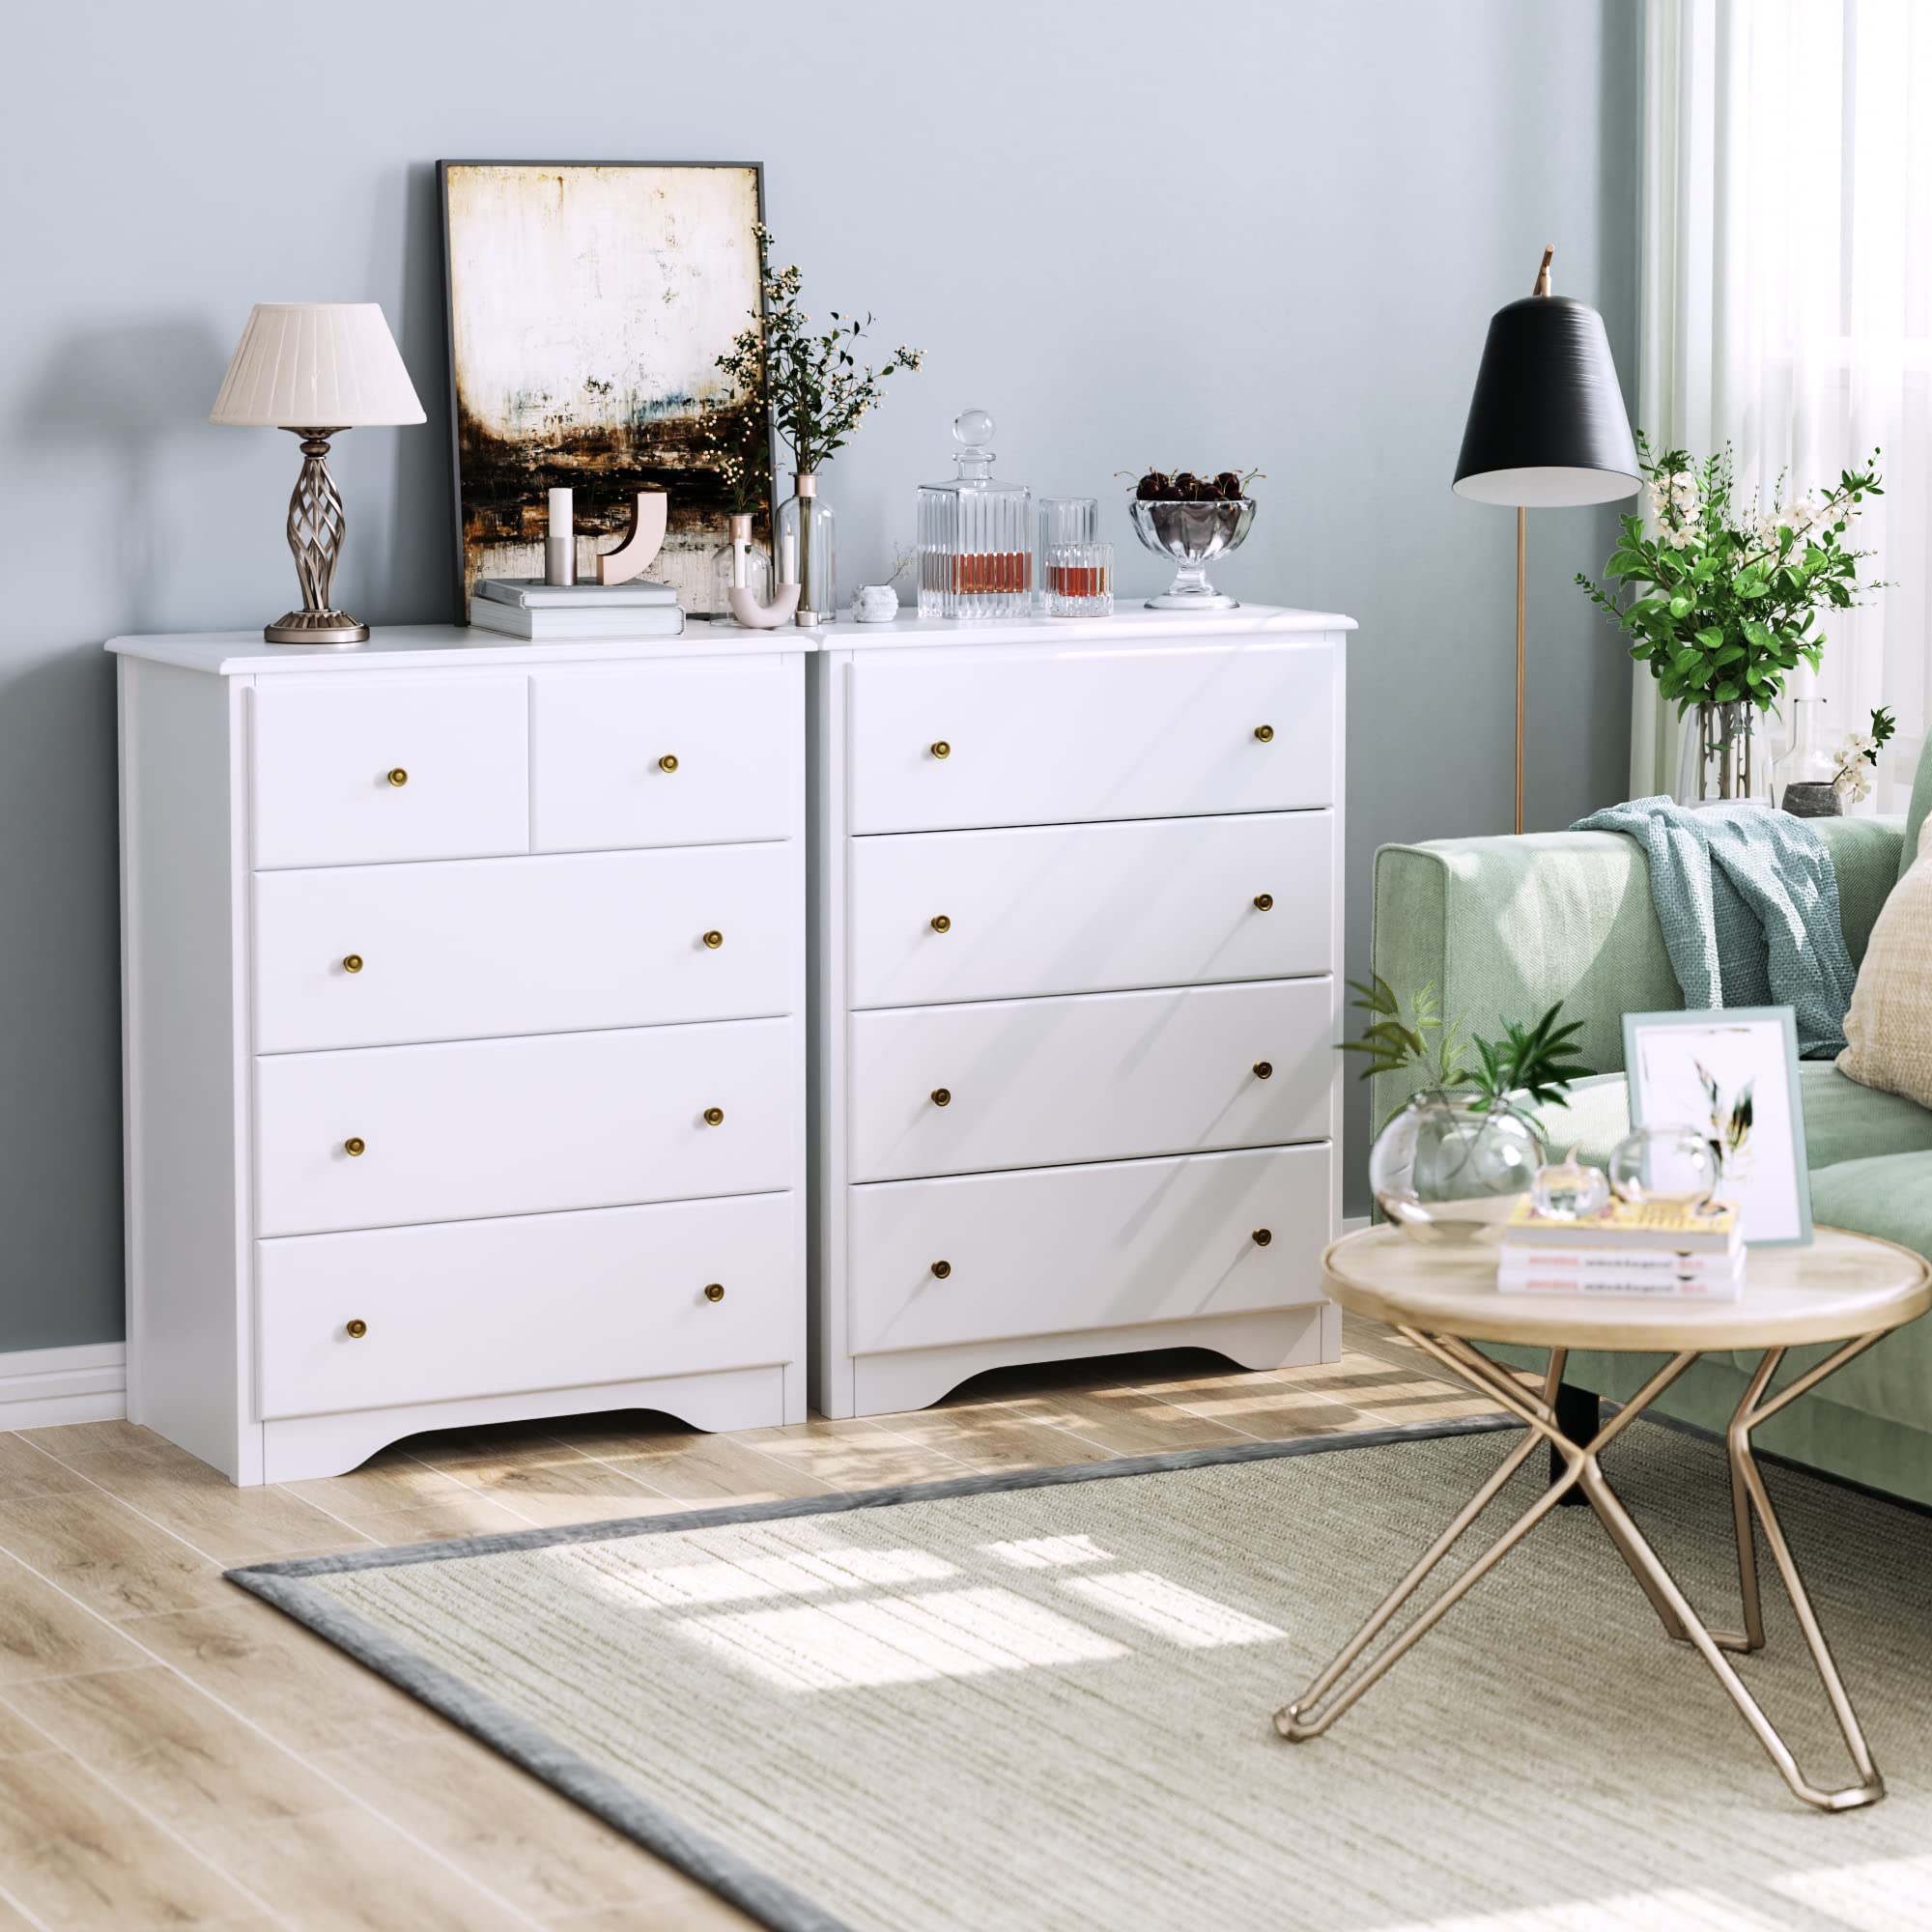 HOUSUIT Dresser with 5 Drawers, Tall Dresser Chest of Drawers, 5 Drawer Dresser with Deep Space, Wood Dresser Storage Cabinet for Living Room, Hallway, Entryway, Office, White